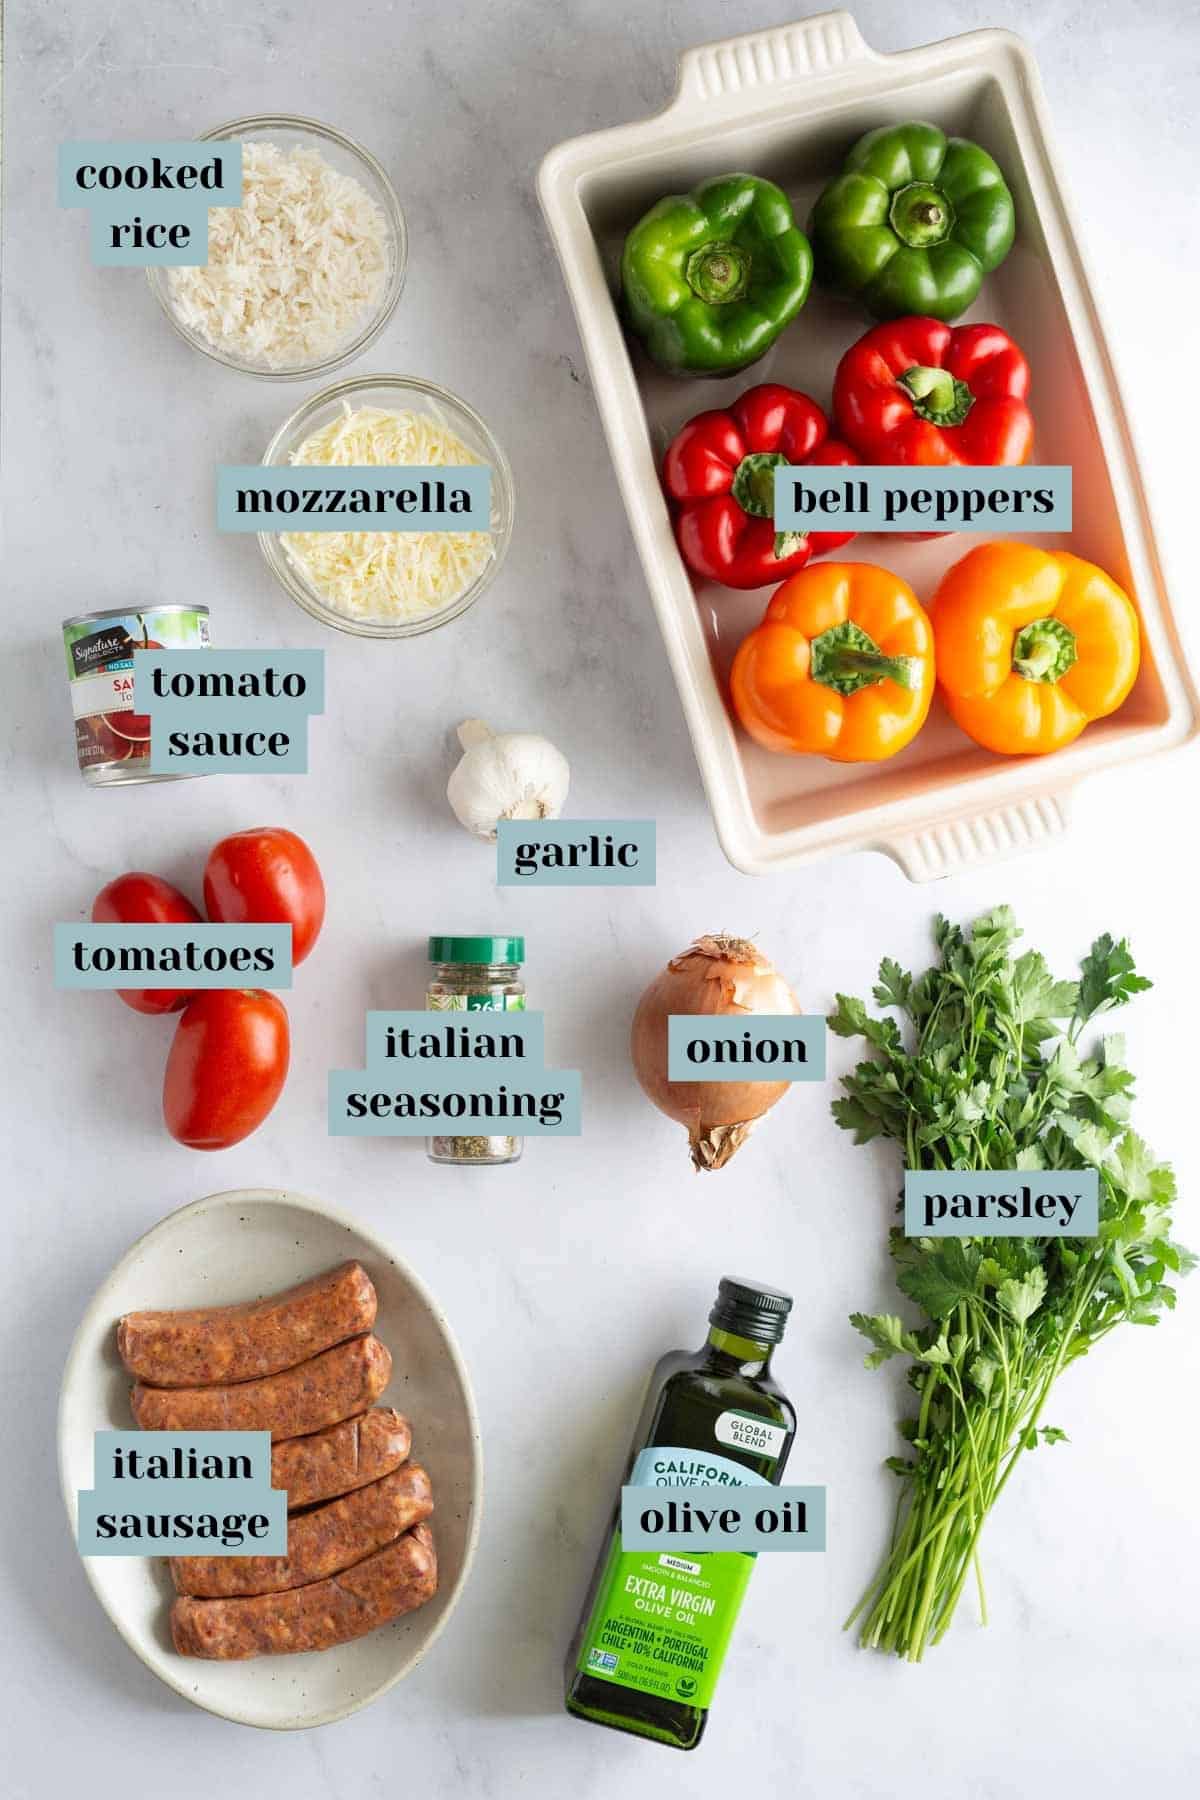 Assorted ingredients for cooking arranged on a surface, including cooked rice, vegetables, Italian sausage, and spices, labeled with their names.